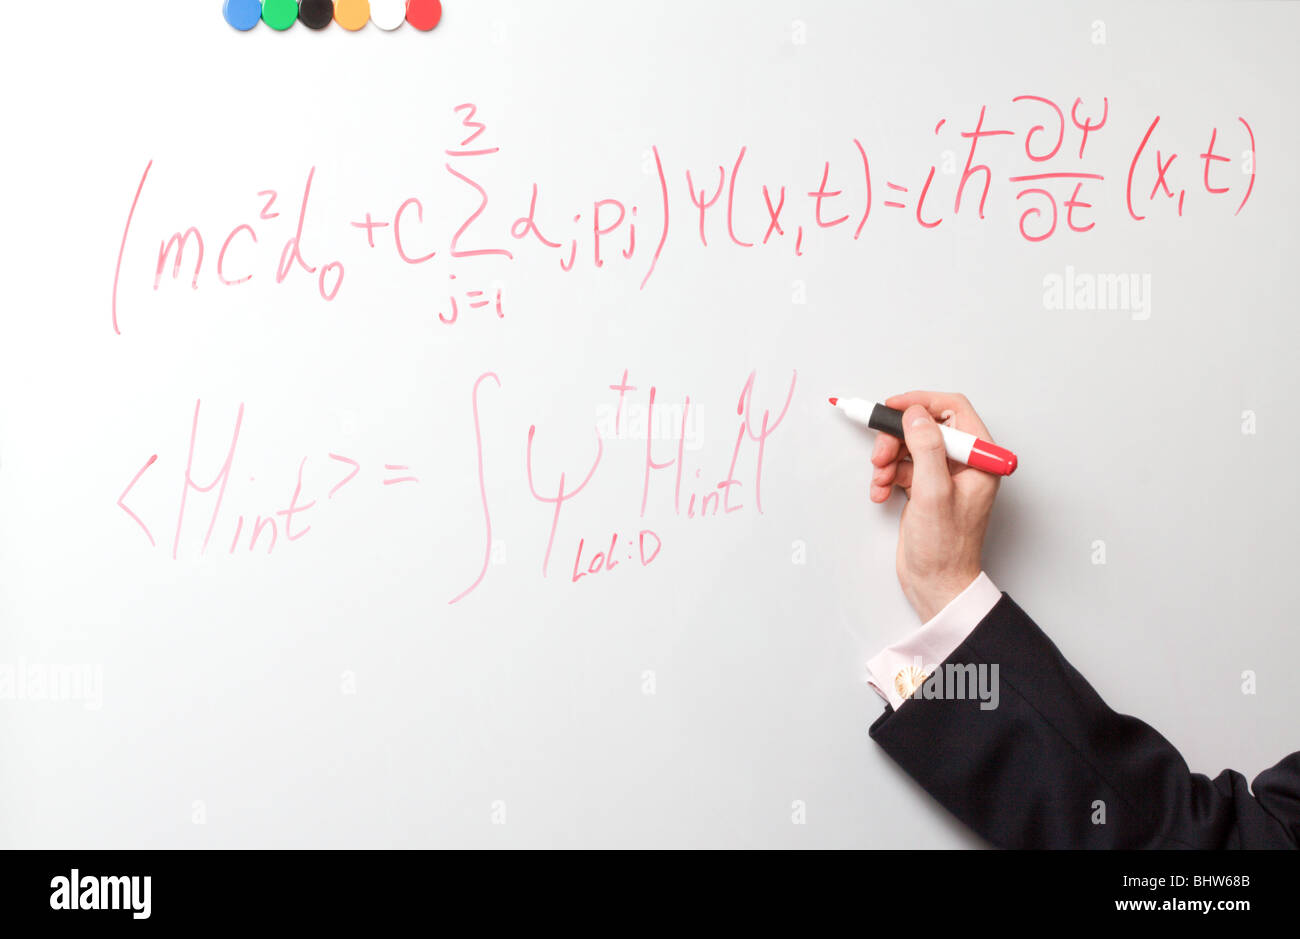 Hand writing formulas a red felt-tip pen on a board Stock Photo